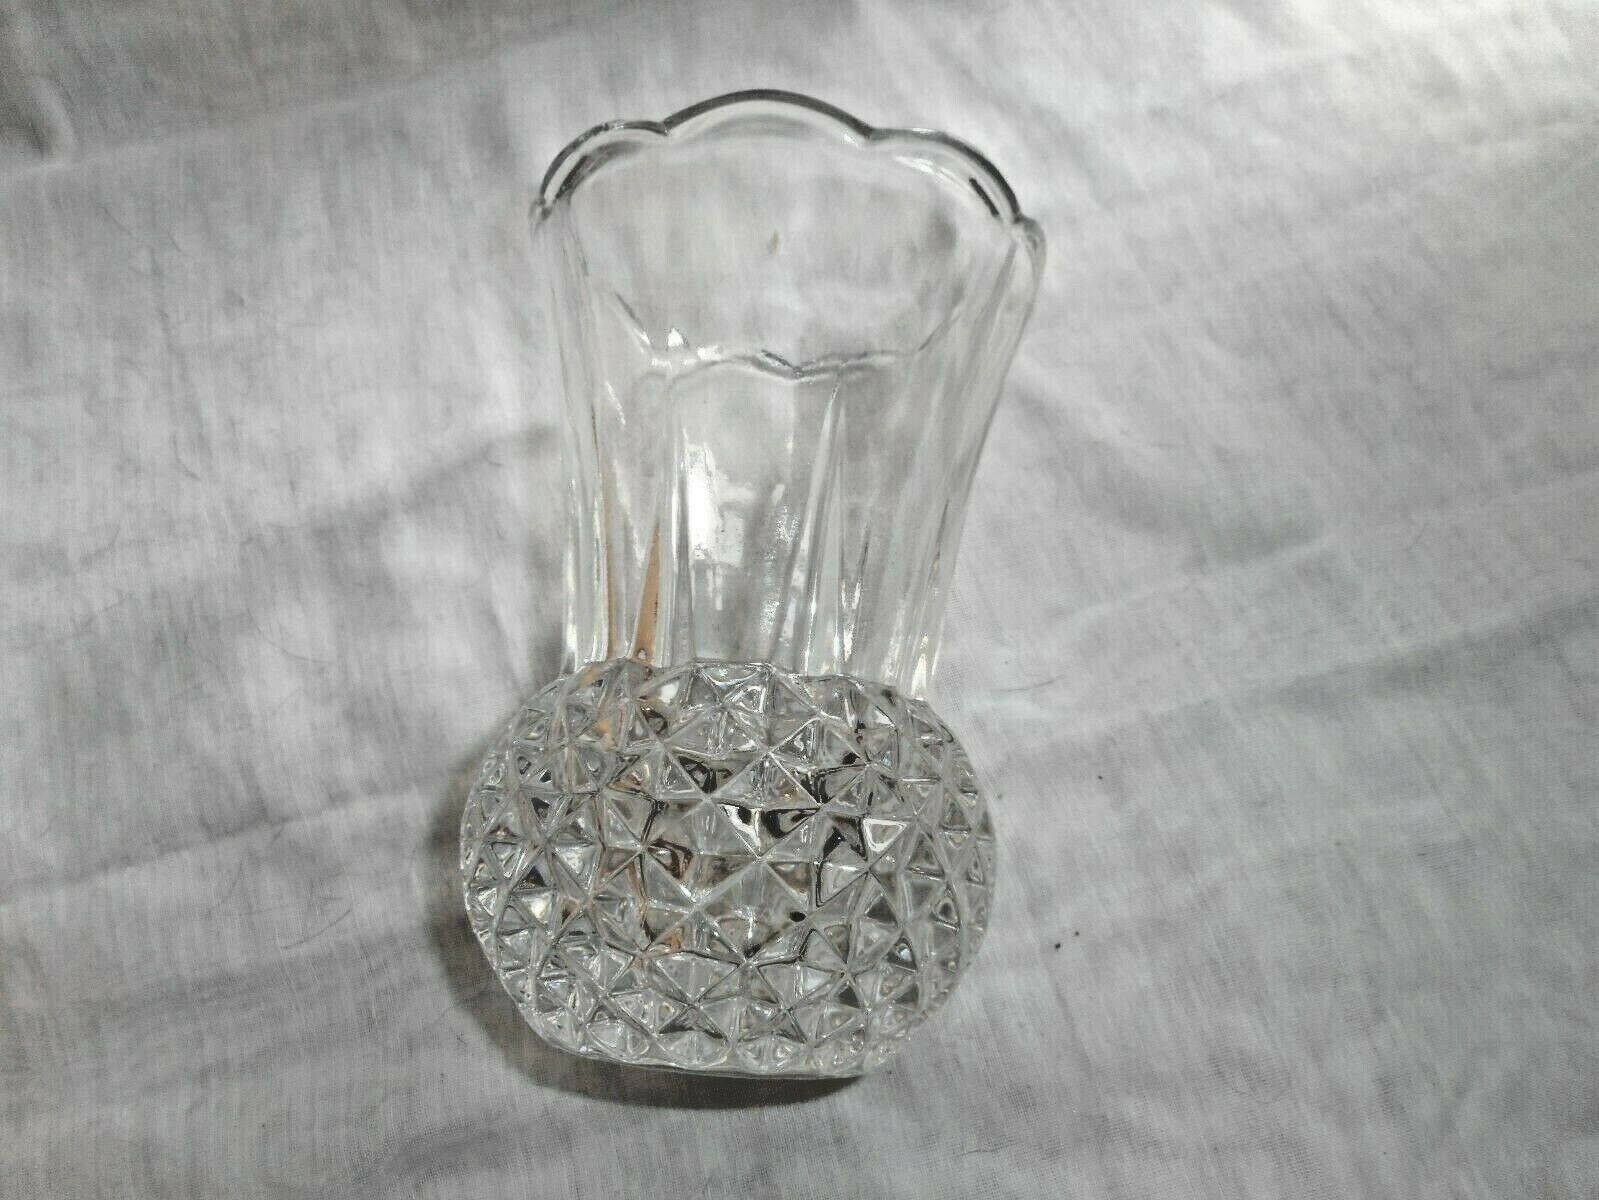 Primary image for Lead Crystal Clear Vase Diamond Cut Pattern Bottom Scallop Edge On Top 5 1/2"